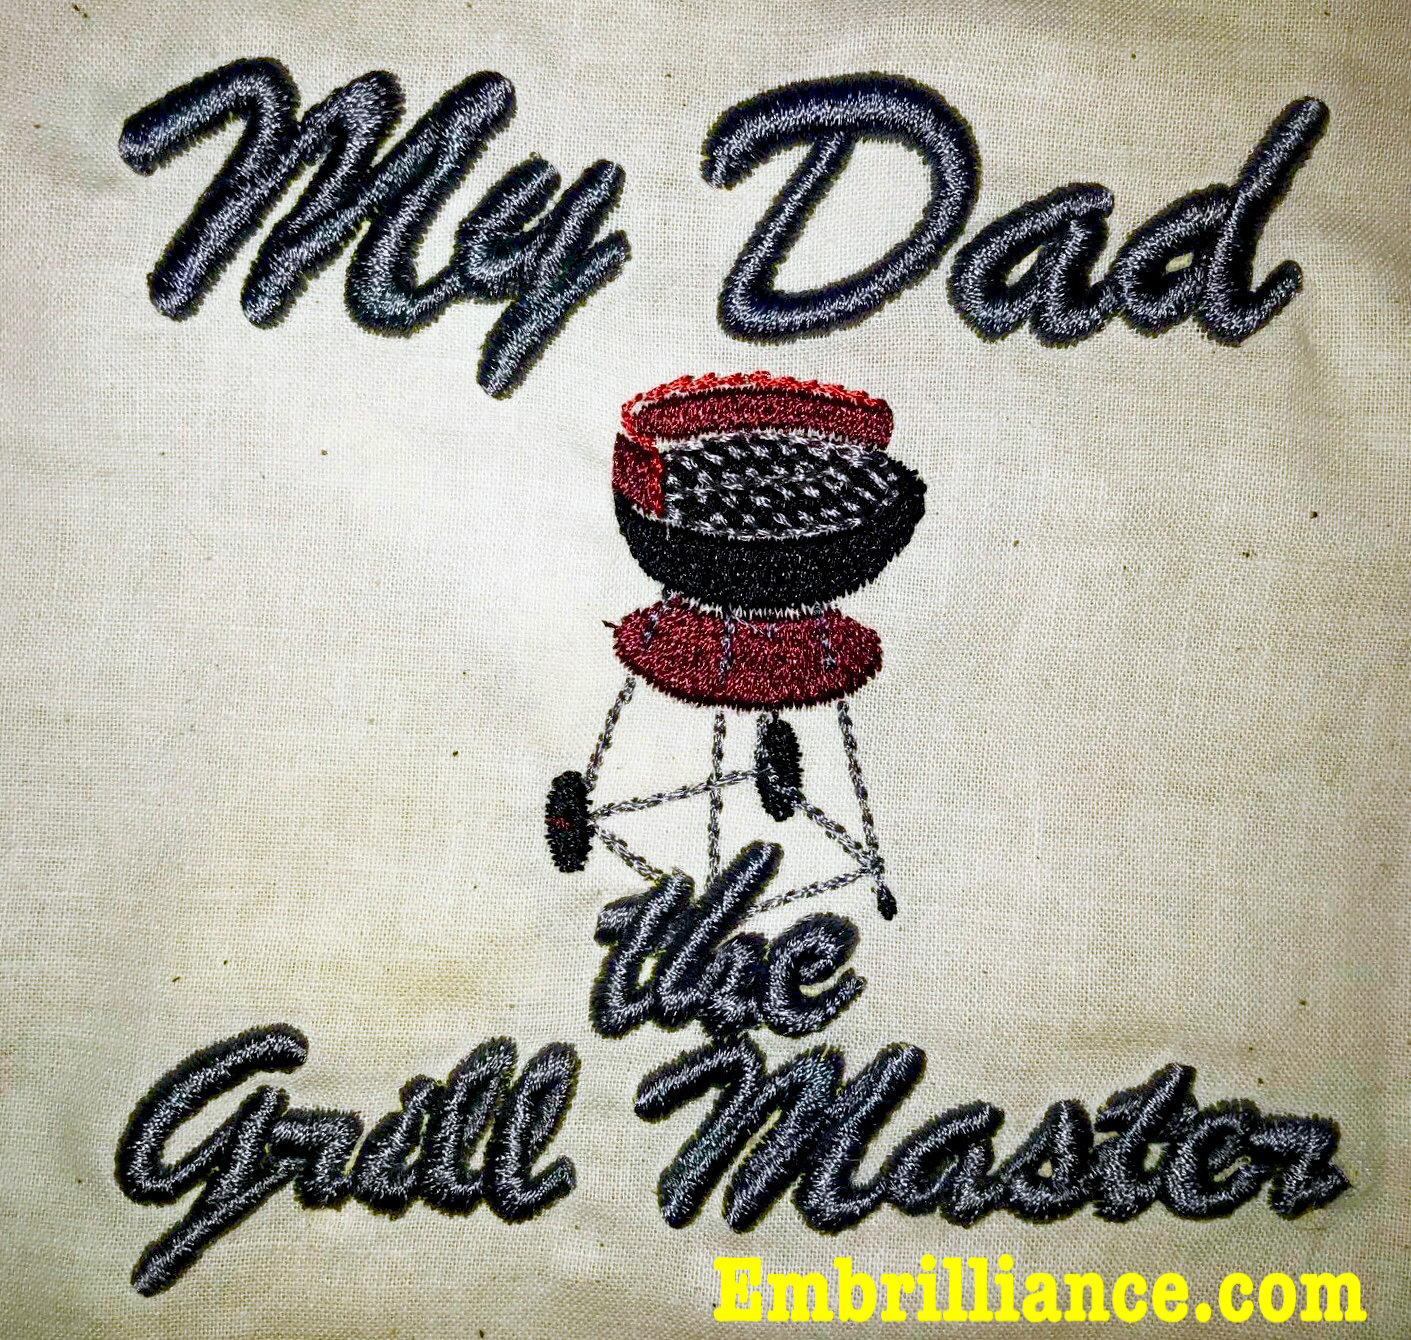 Happy Father’s Day – Free ‘My Dad the Grill Master’ Embroidery Design